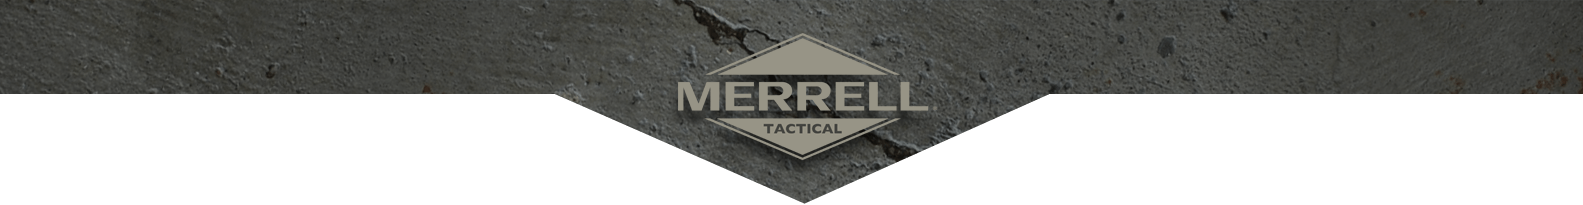 Merrell Tactical Australia Police Boots Military Boots